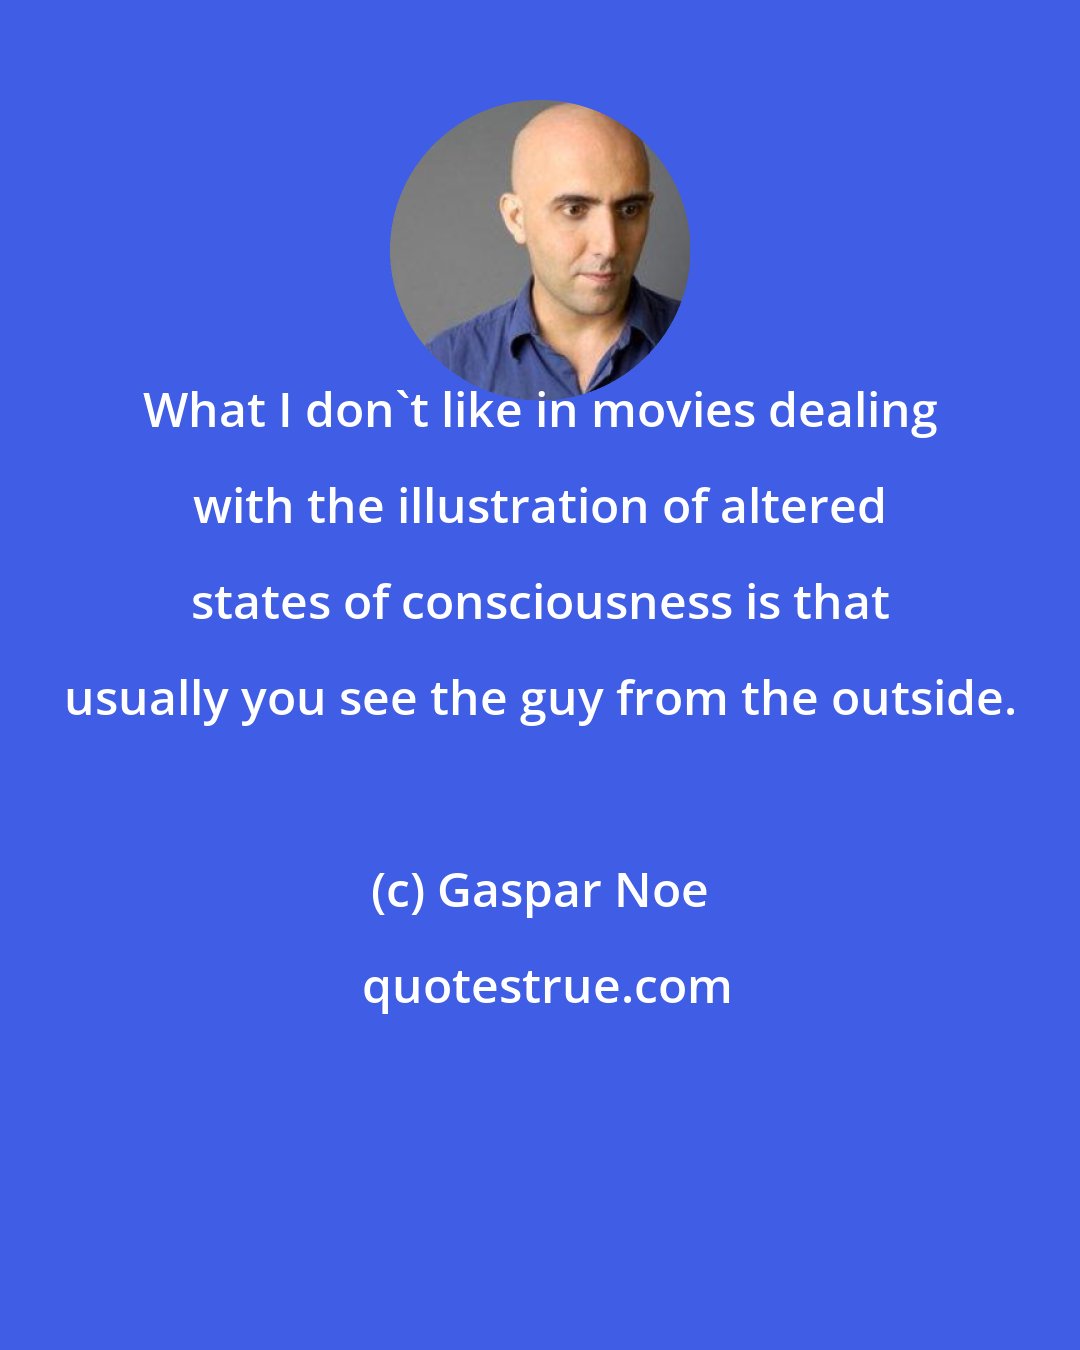 Gaspar Noe: What I don't like in movies dealing with the illustration of altered states of consciousness is that usually you see the guy from the outside.